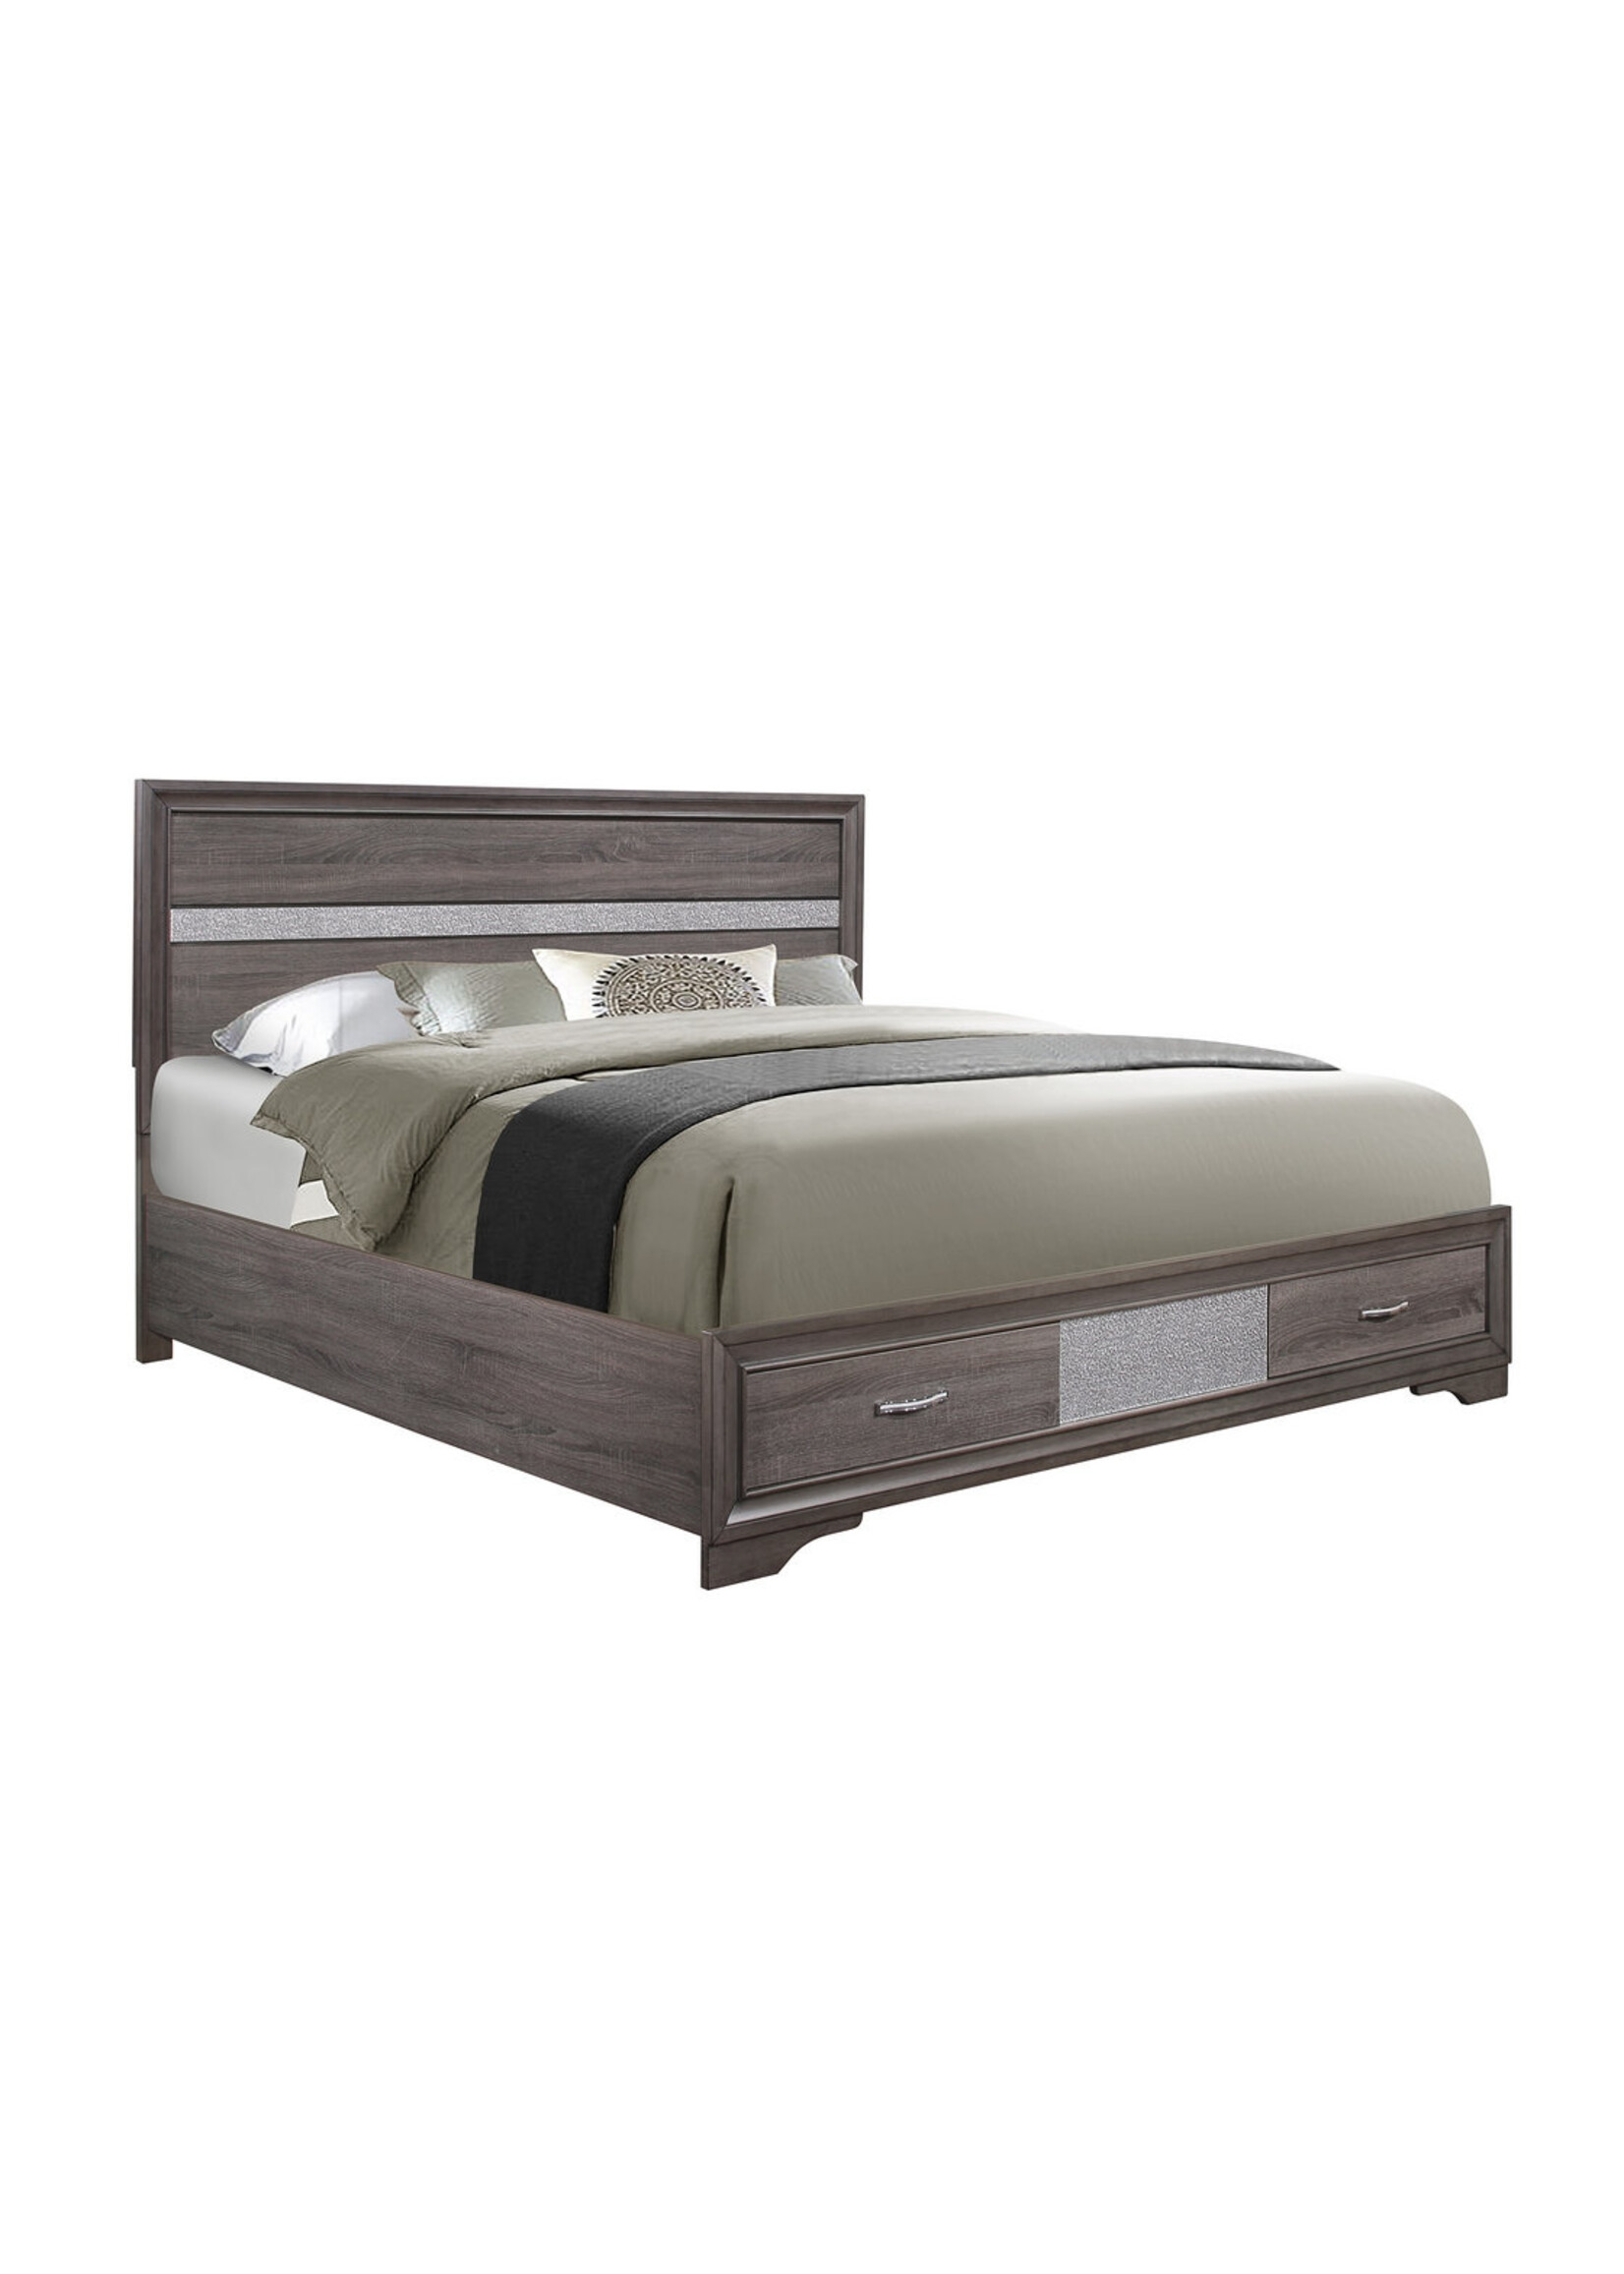 Harper Bed Frame with Drawers